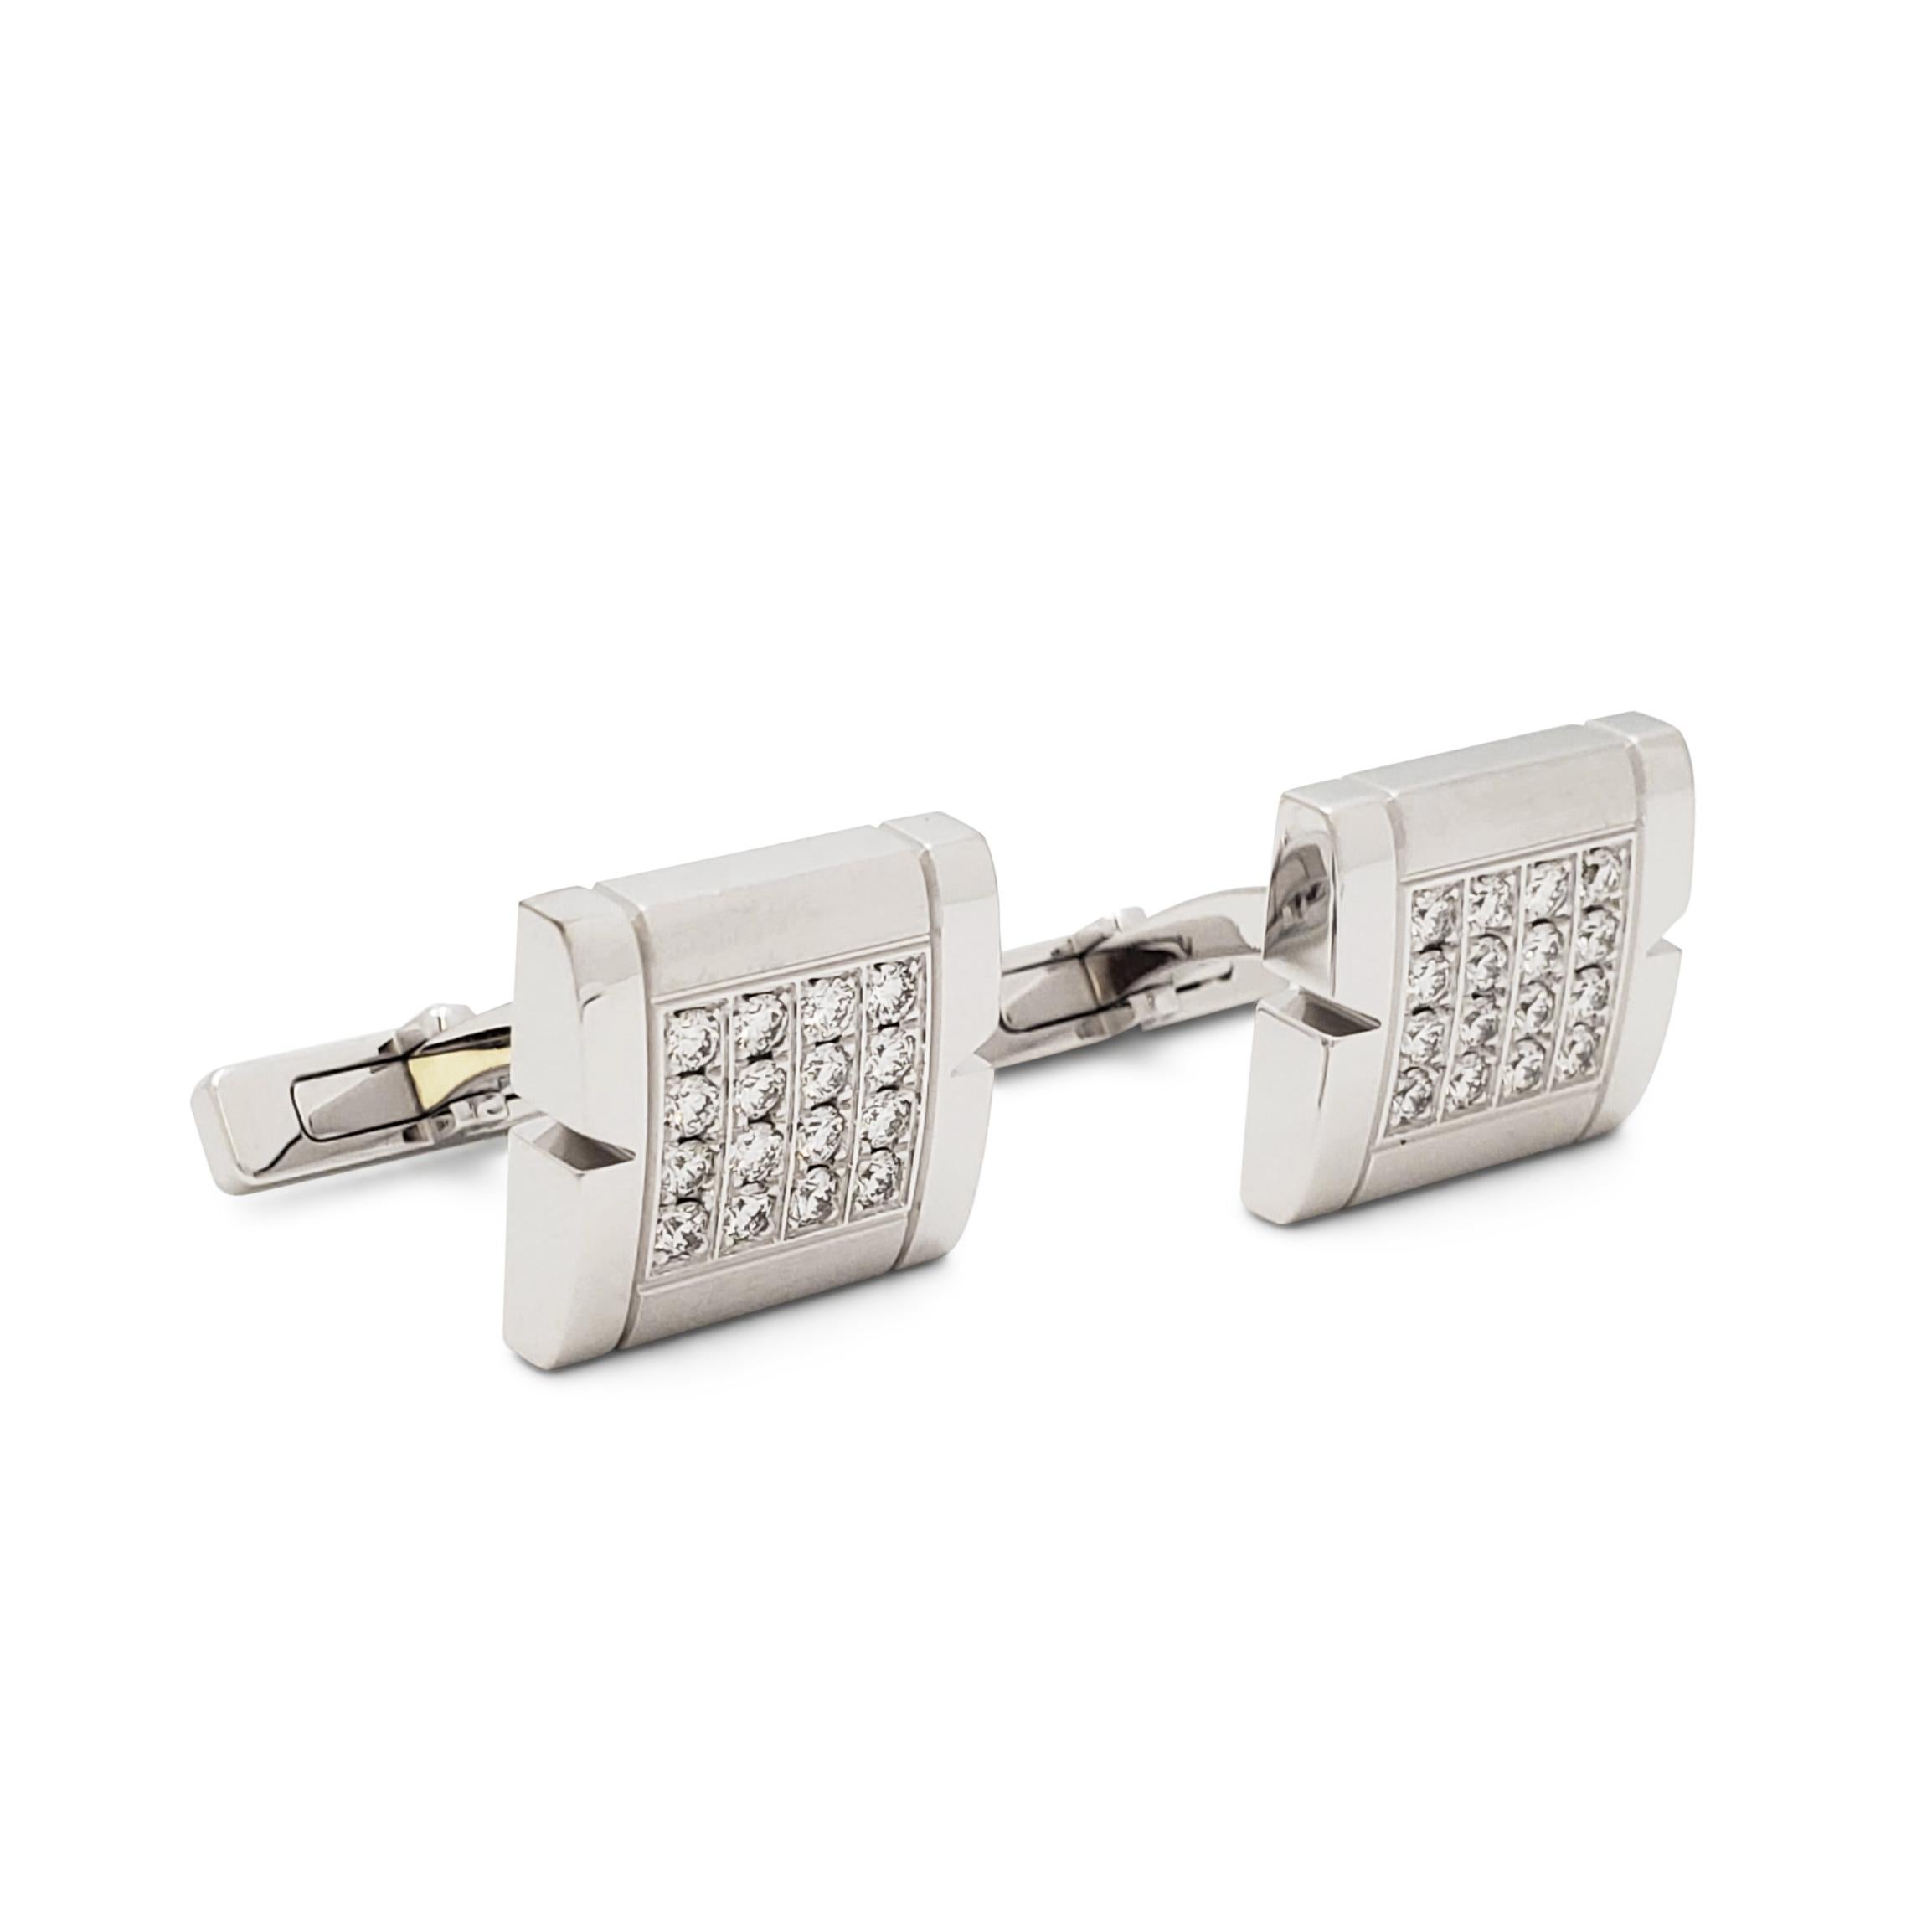 Authentic Cartier Tank Française cufflinks crafted in 18 karat white gold and set with round brilliant diamonds for an estimated 0.75 carats total weight.  The Tank Française motif measures .55 inches wide x .50 inches long.  Cufflinks are presented